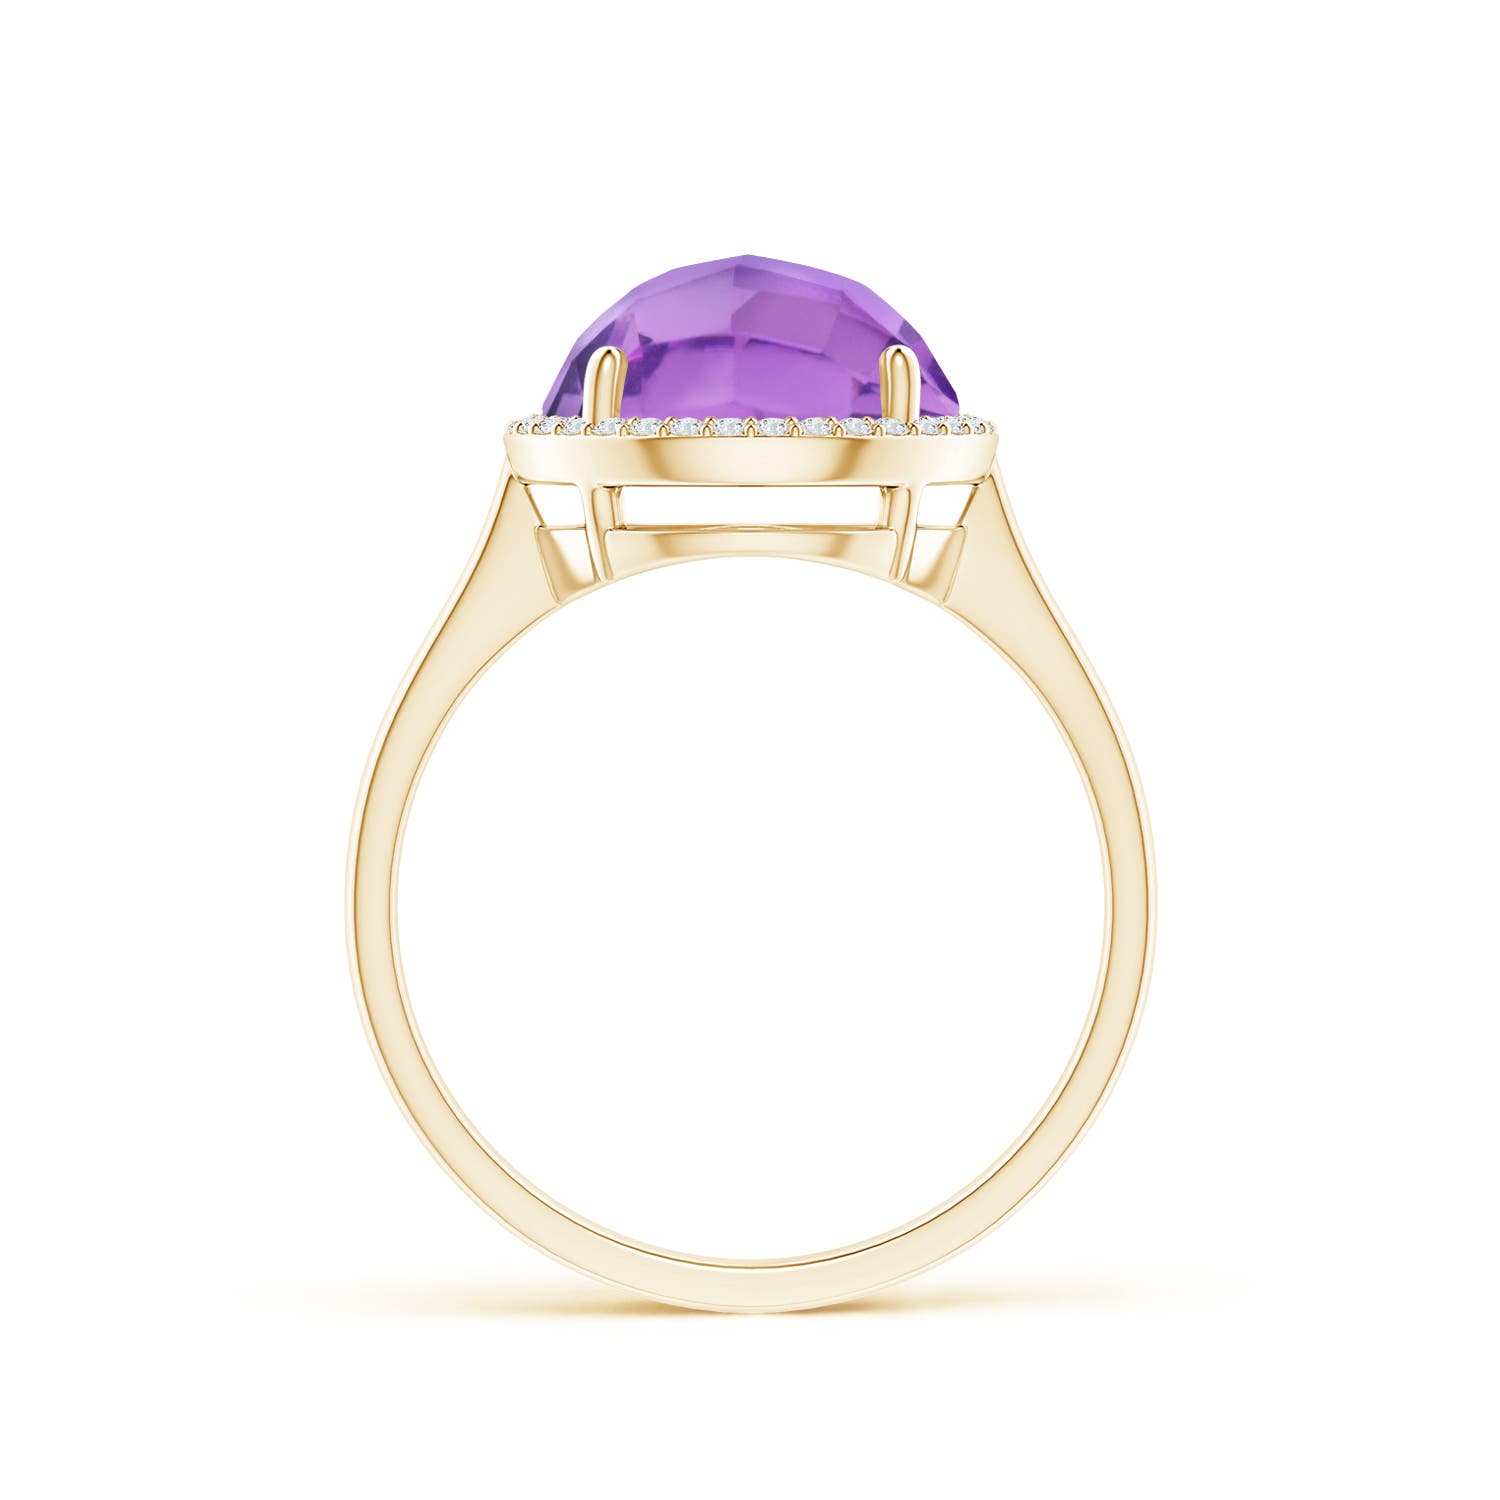 A - Amethyst / 3.77 CT / 14 KT Yellow Gold